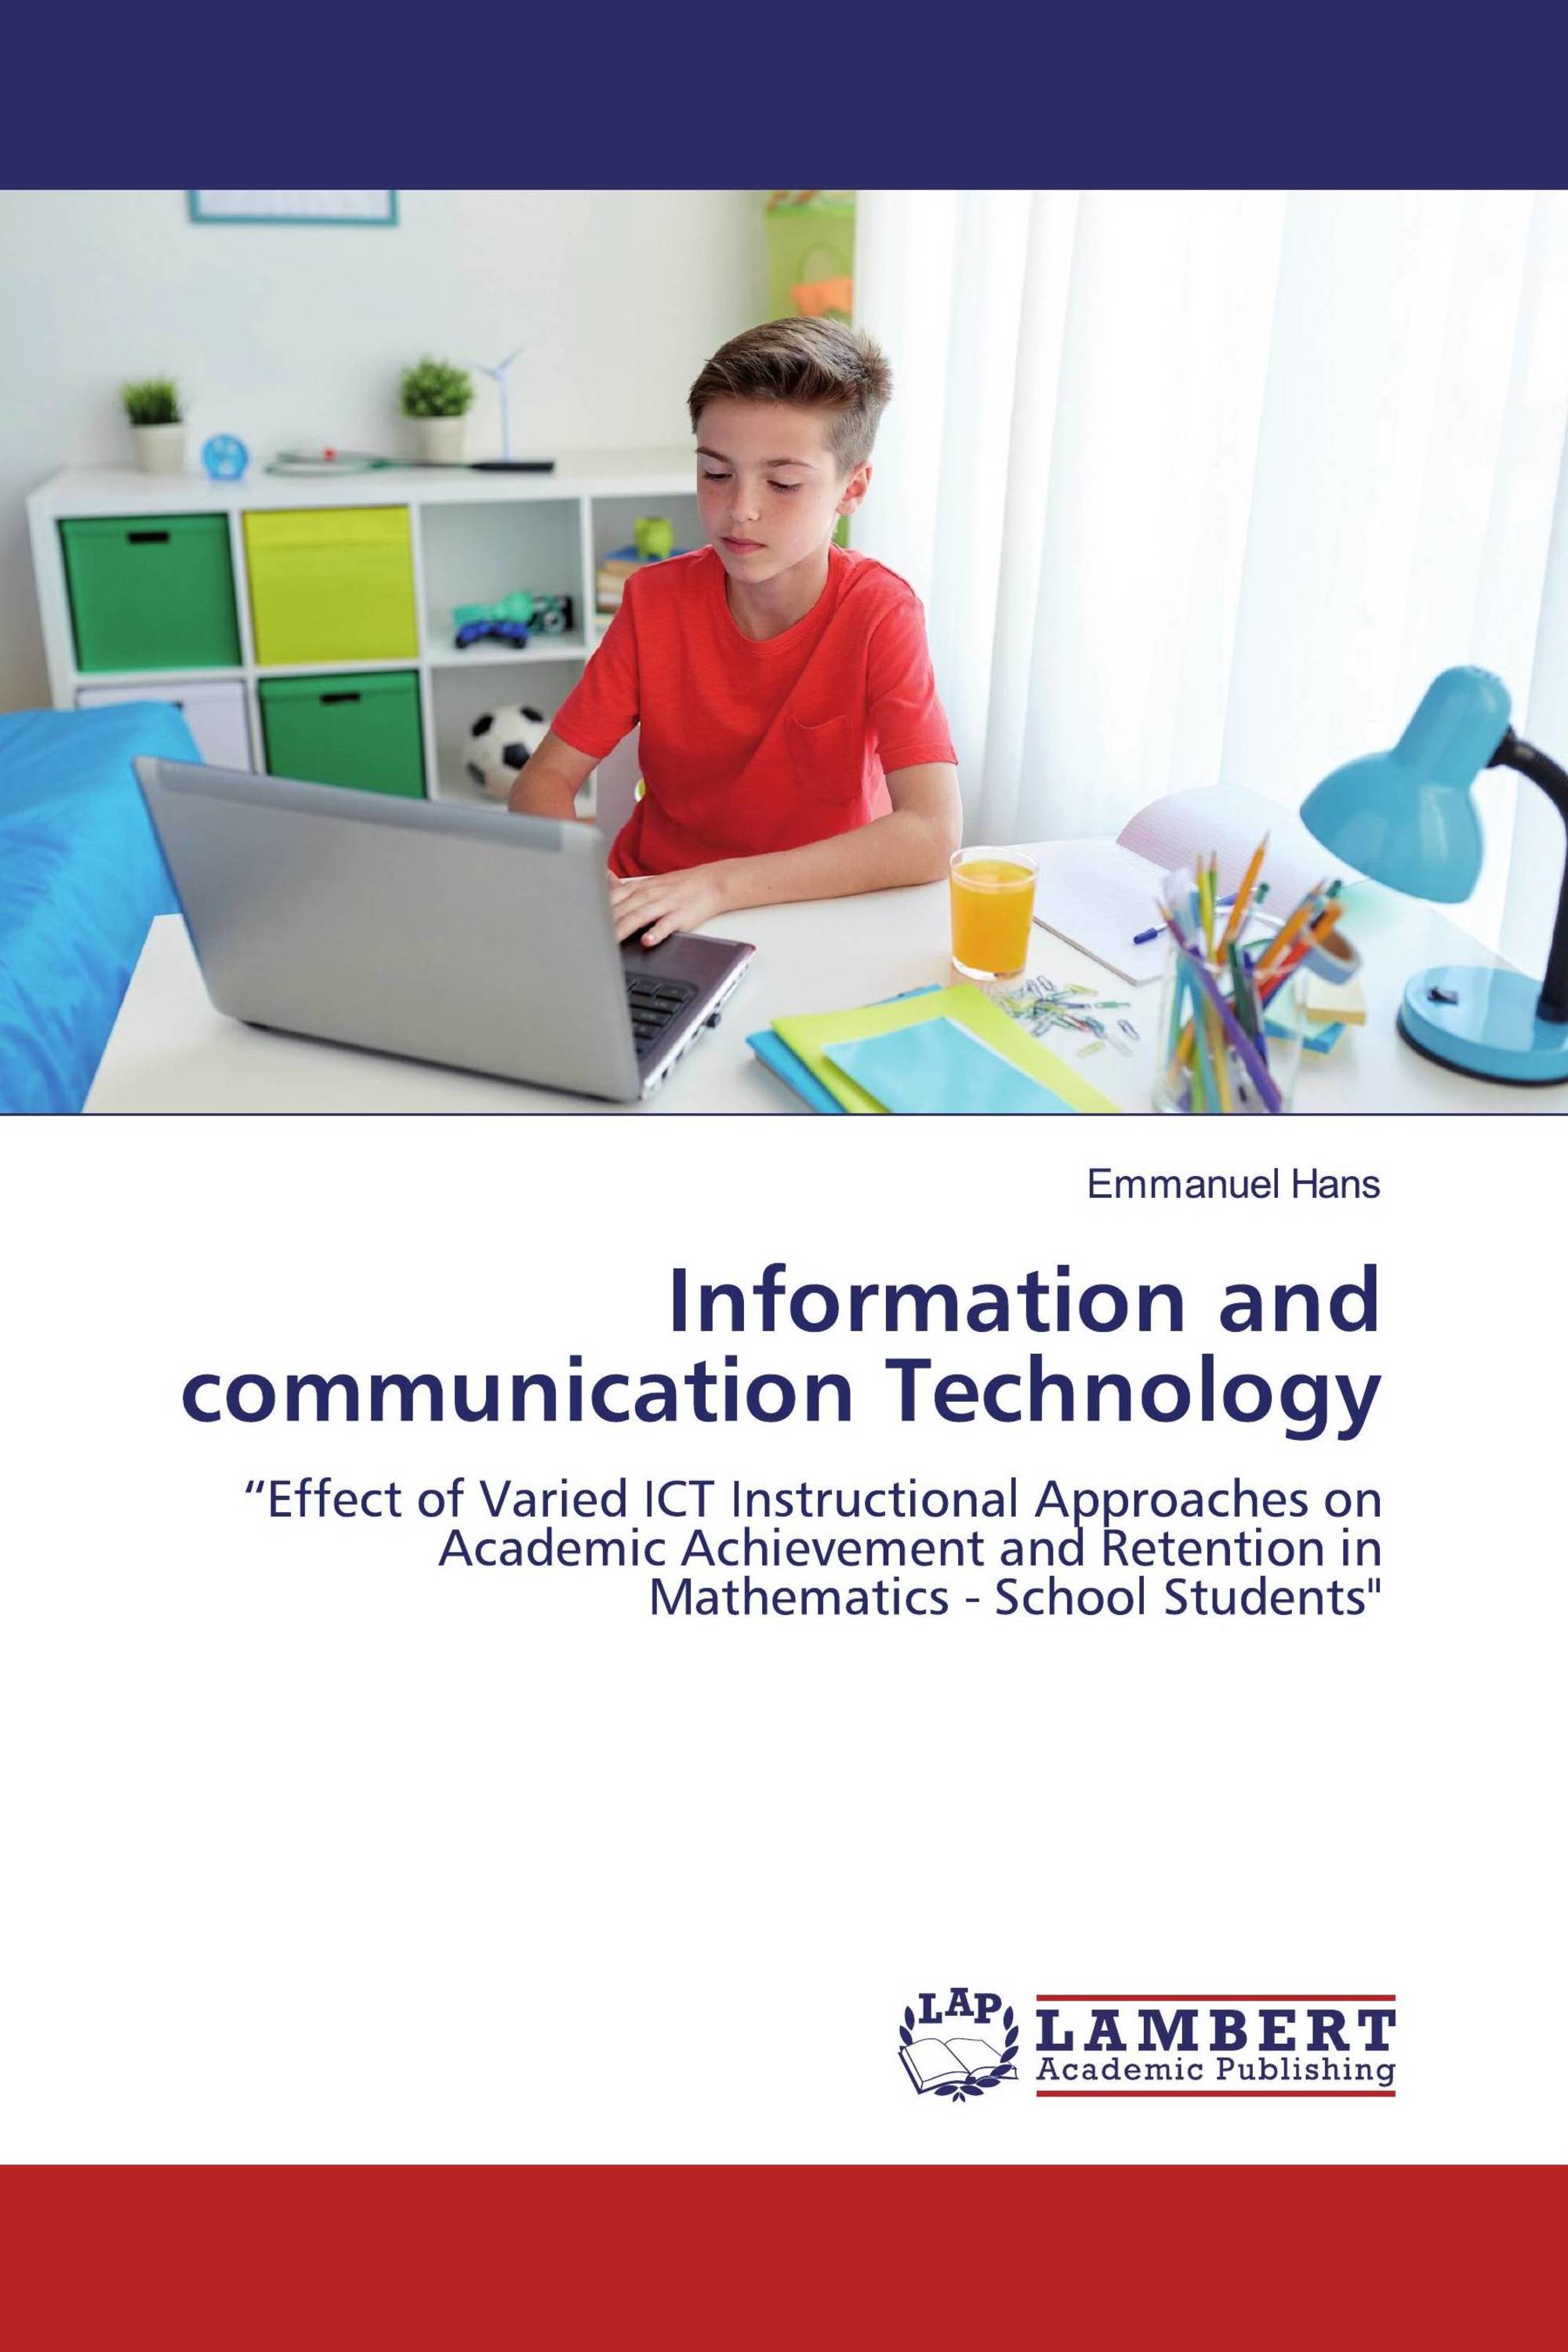 thesis about information and communication technology